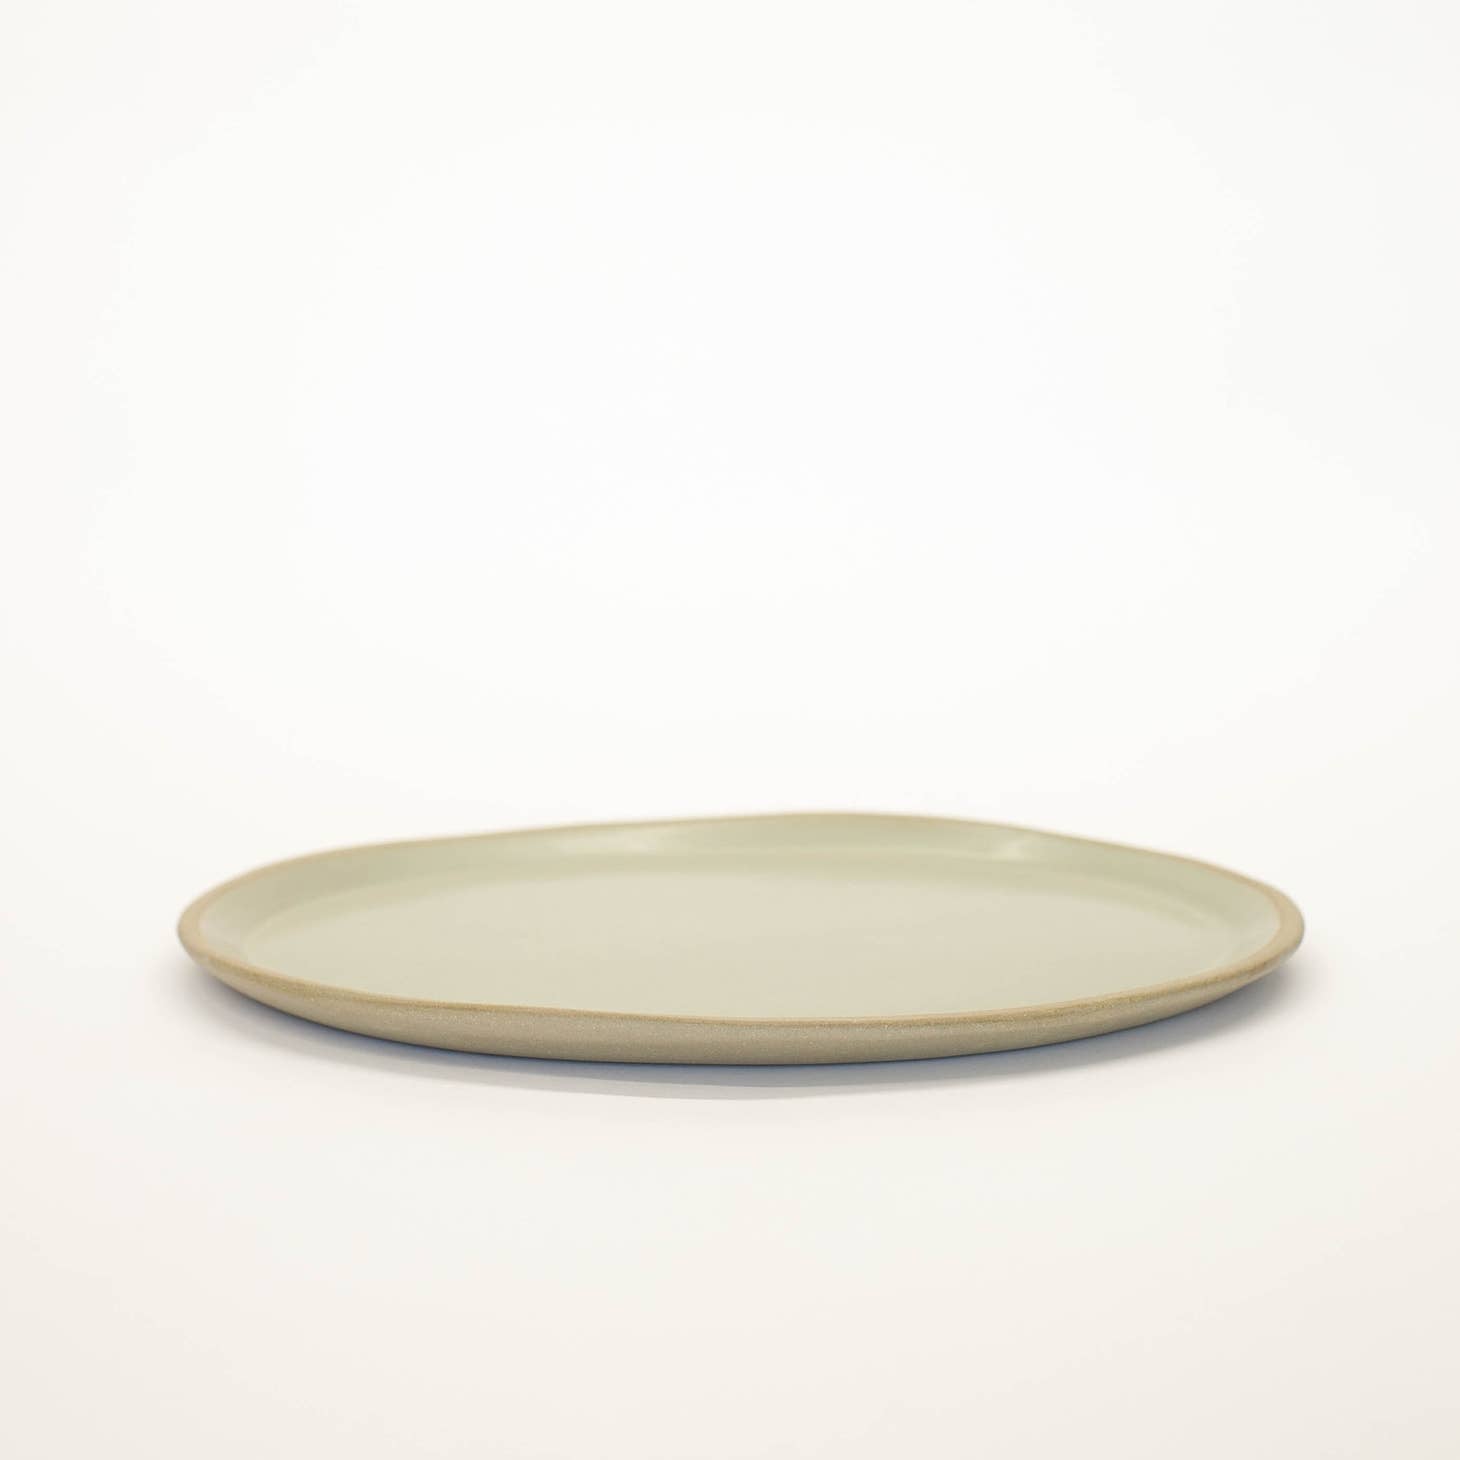 Hand-built with shallow walls, some organic quality around the rim, and a flat base, this ceramic platter is designed for serving. Use it as a charcuterie board, snack platter, coffee table tray, or your main course!  Handmade in Virginia